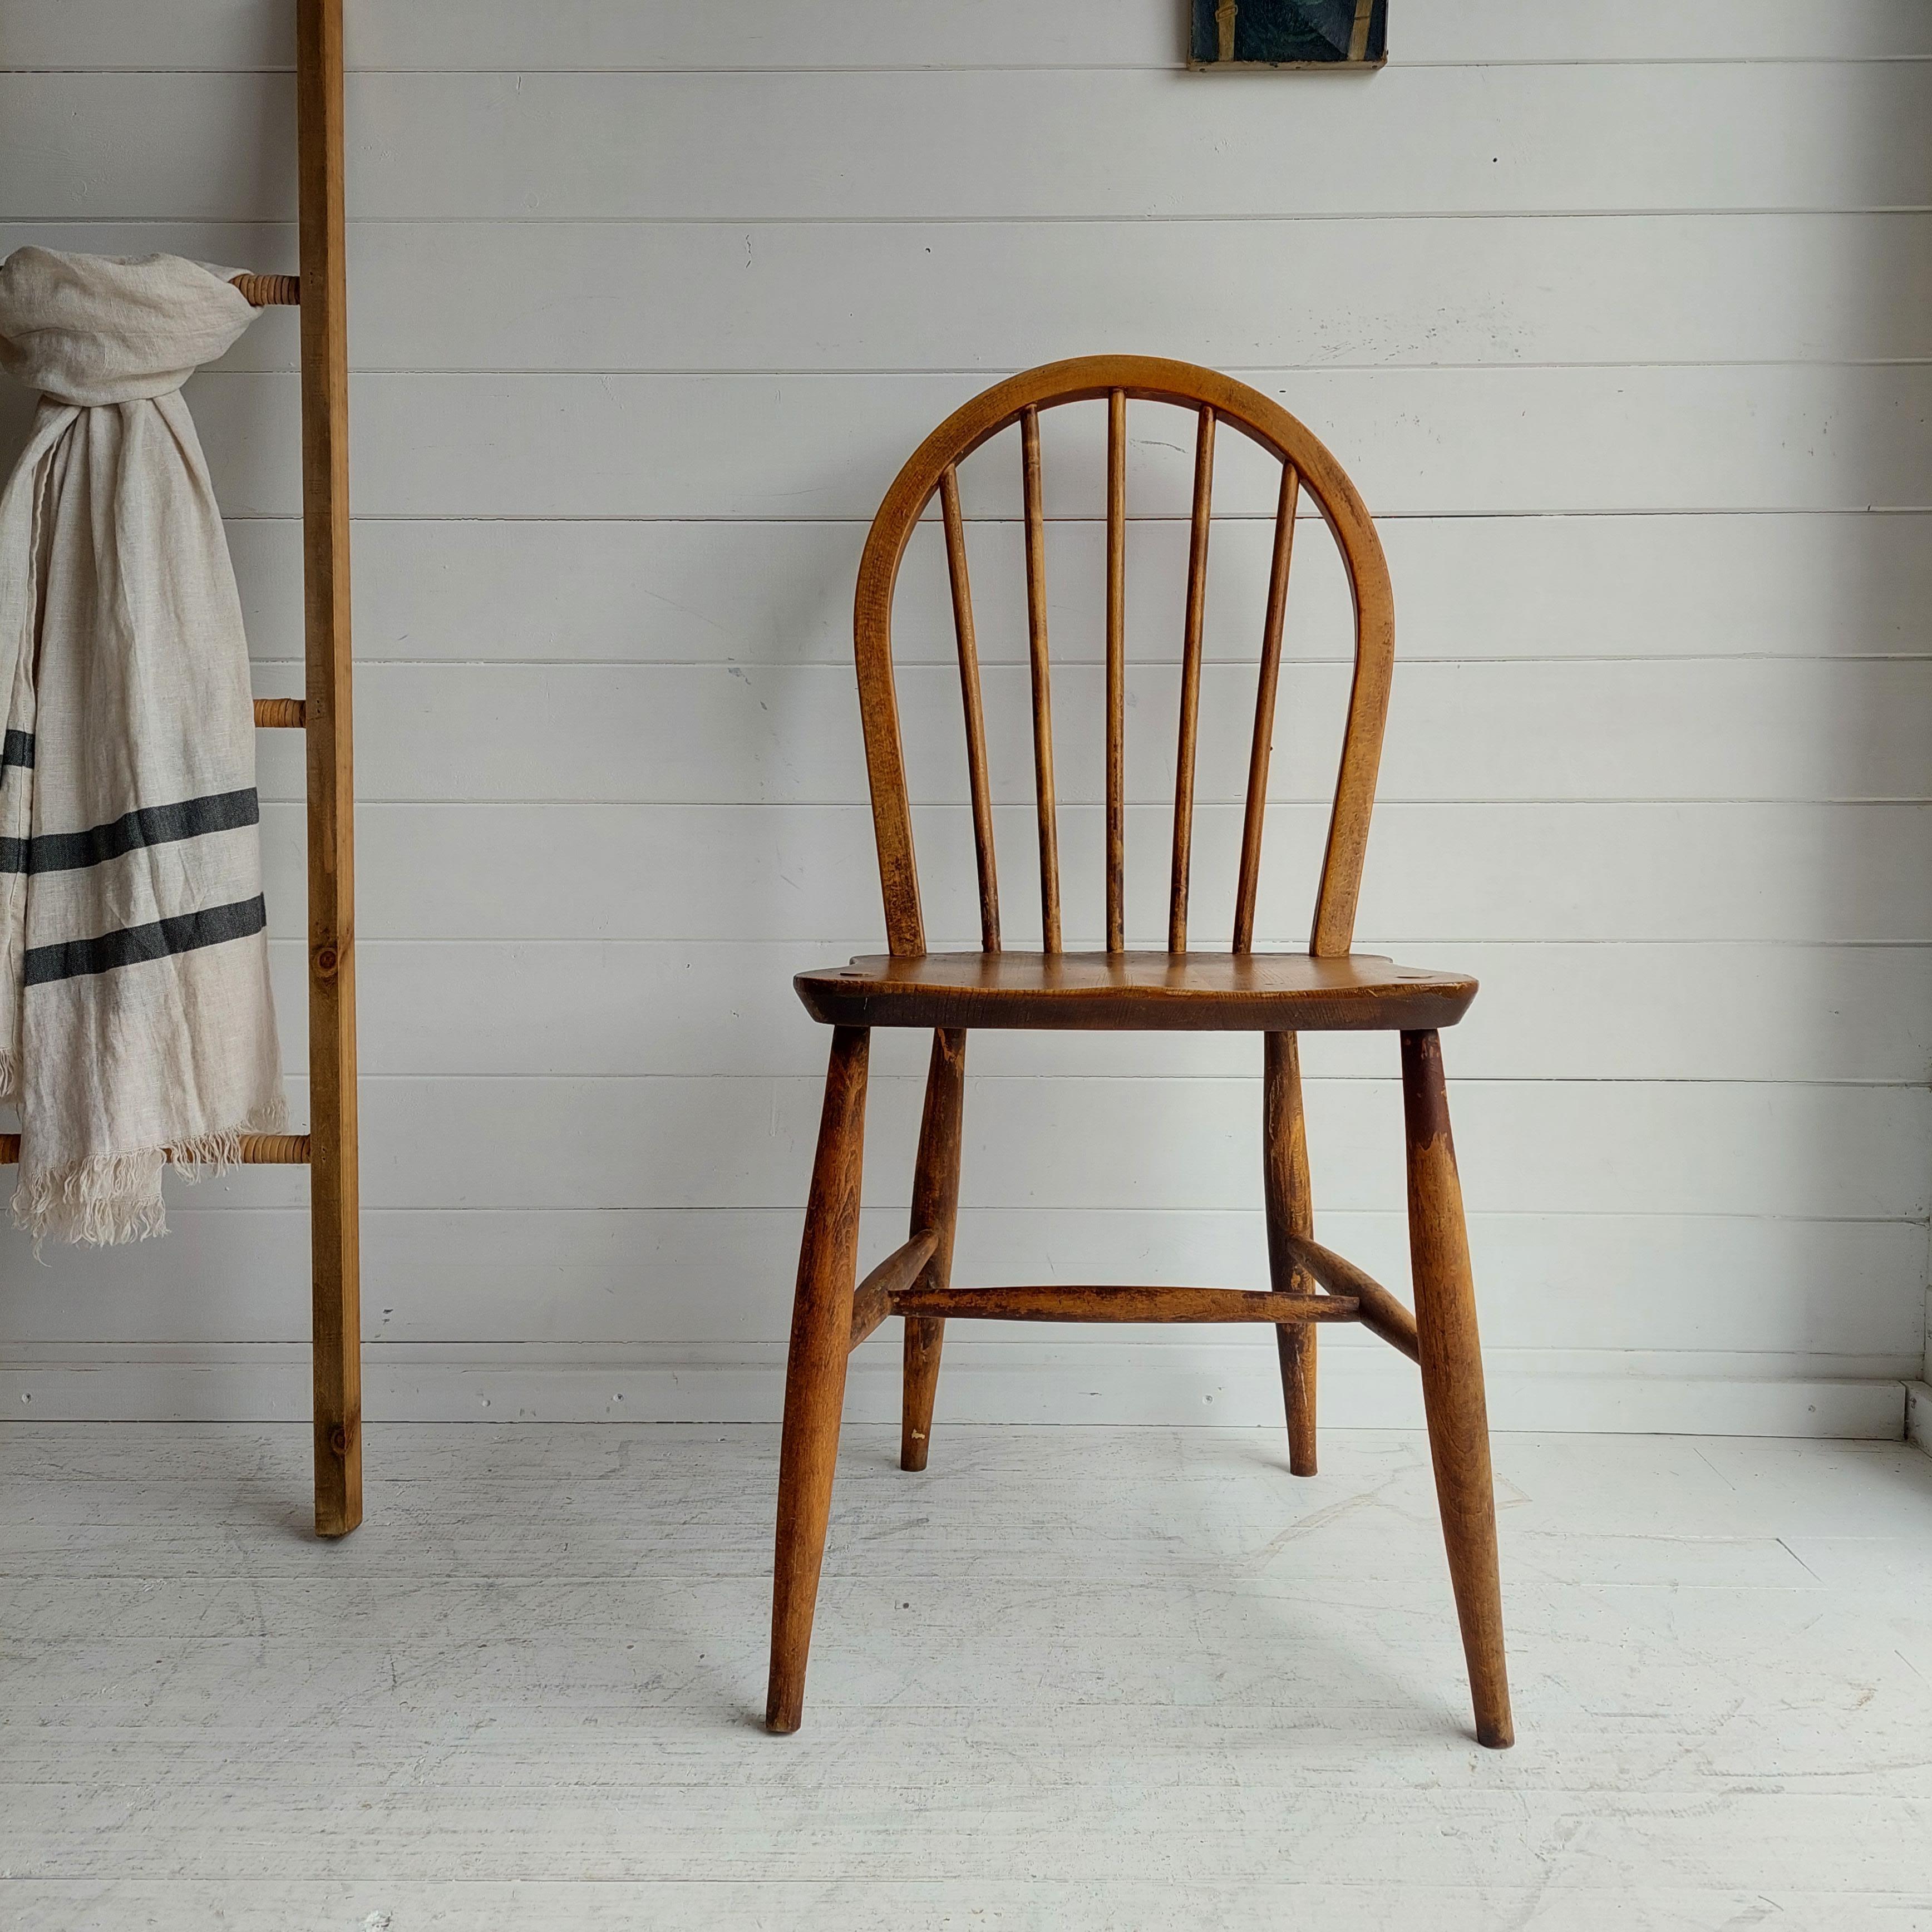 Rustic Midcentury Ercol Windsor Kitchen Chair 'Model No. 4a or No. 100', 50s